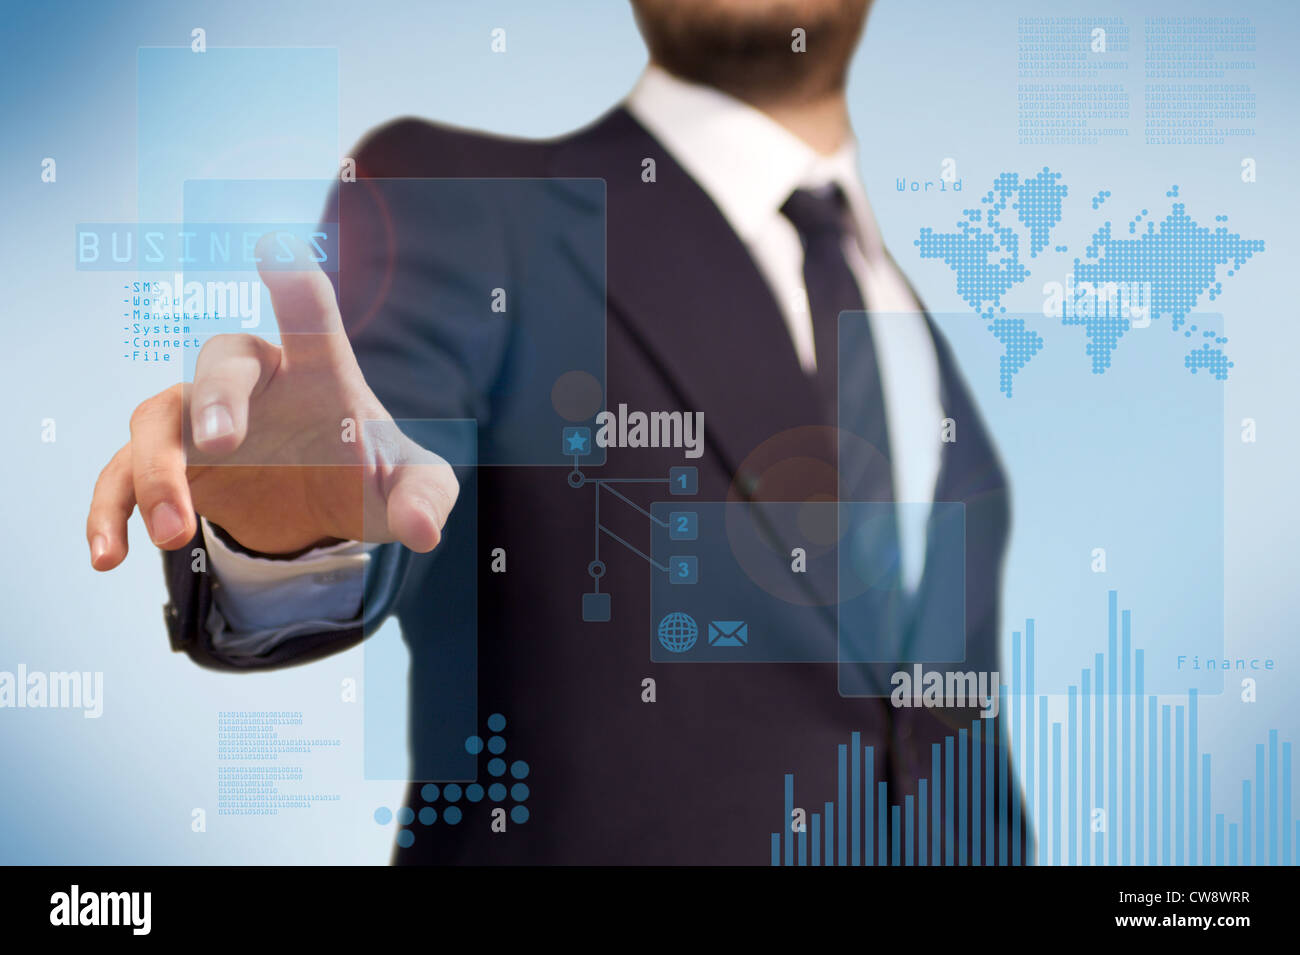 Digital technology for the business application, a business man using a touchscreen for finace purpuse, diagram and histogram Stock Photo